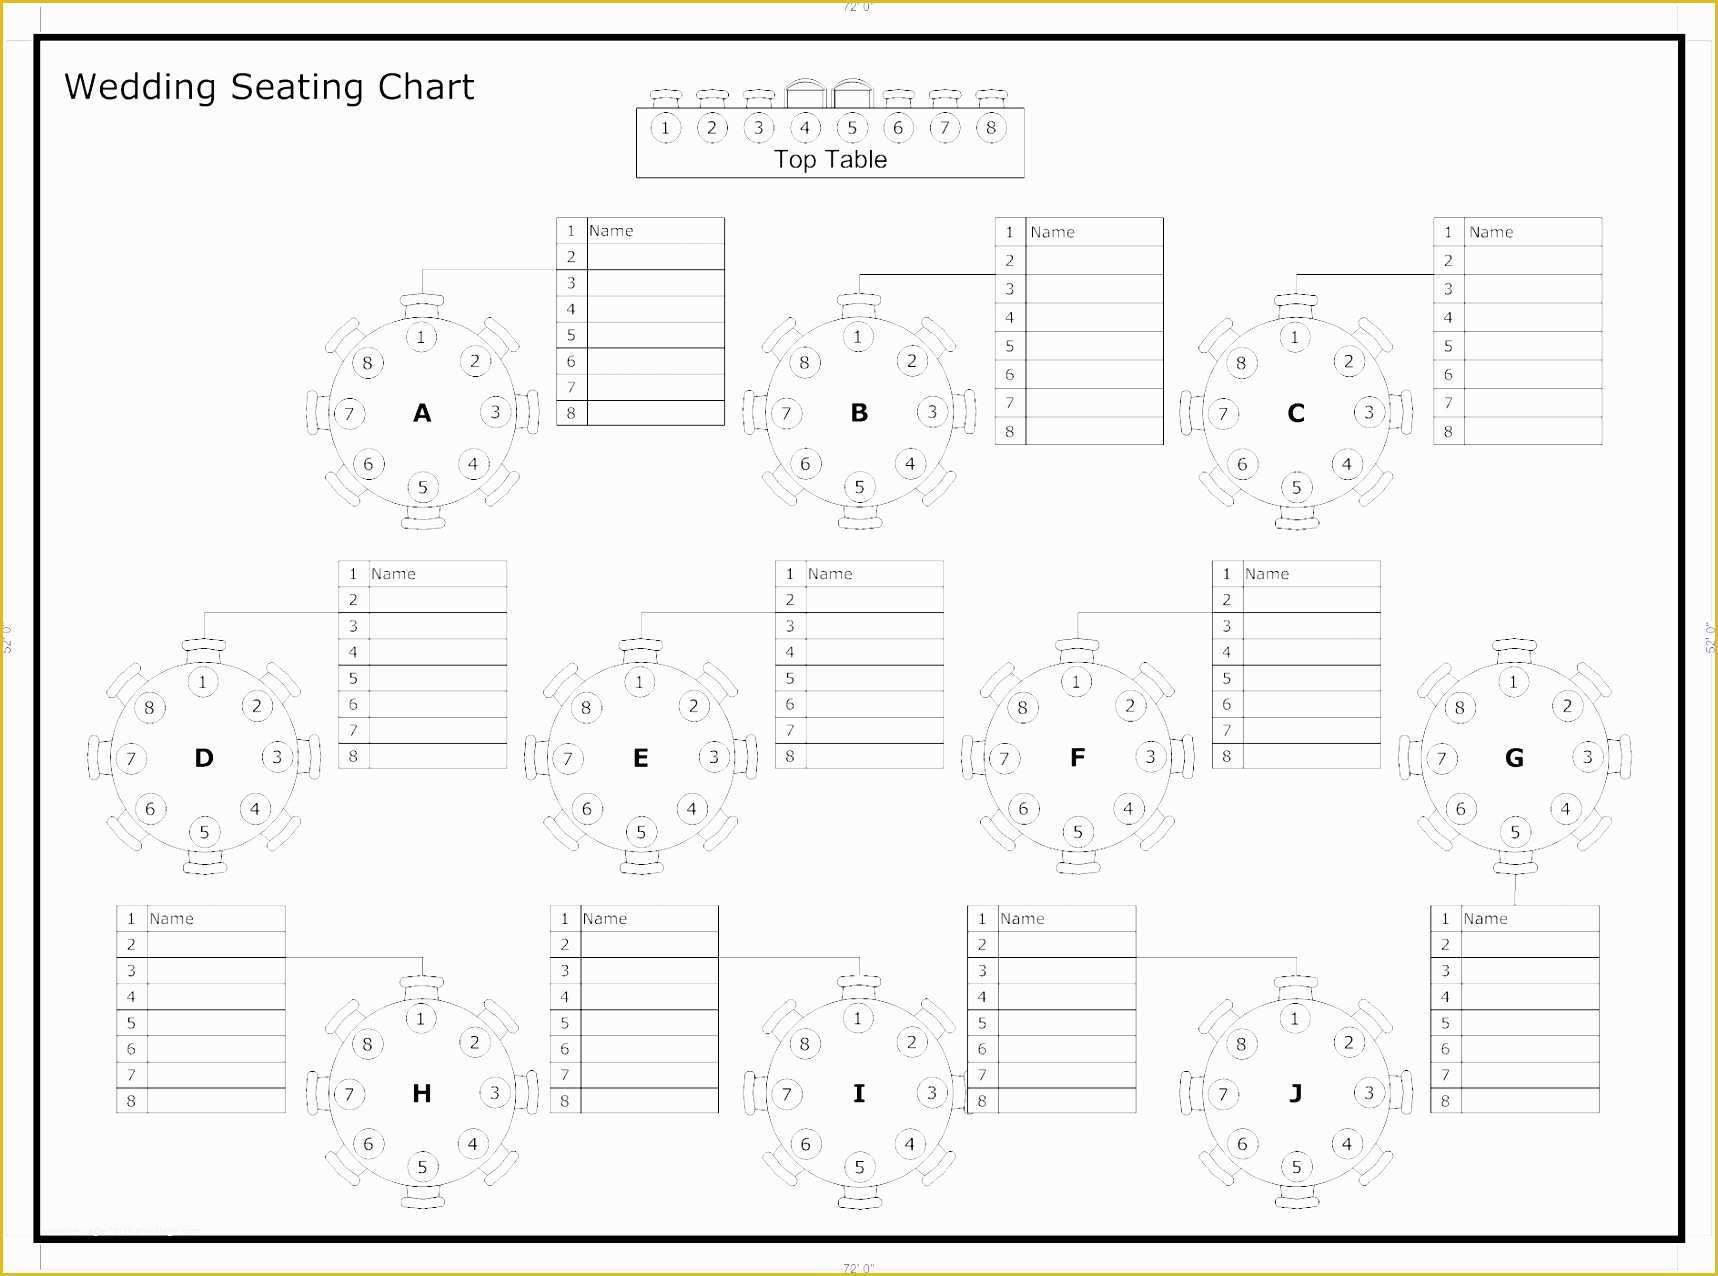 Free Wedding Seating Chart Template Excel Of 6 Wedding Seating Chart Template Excel Exceltemplates